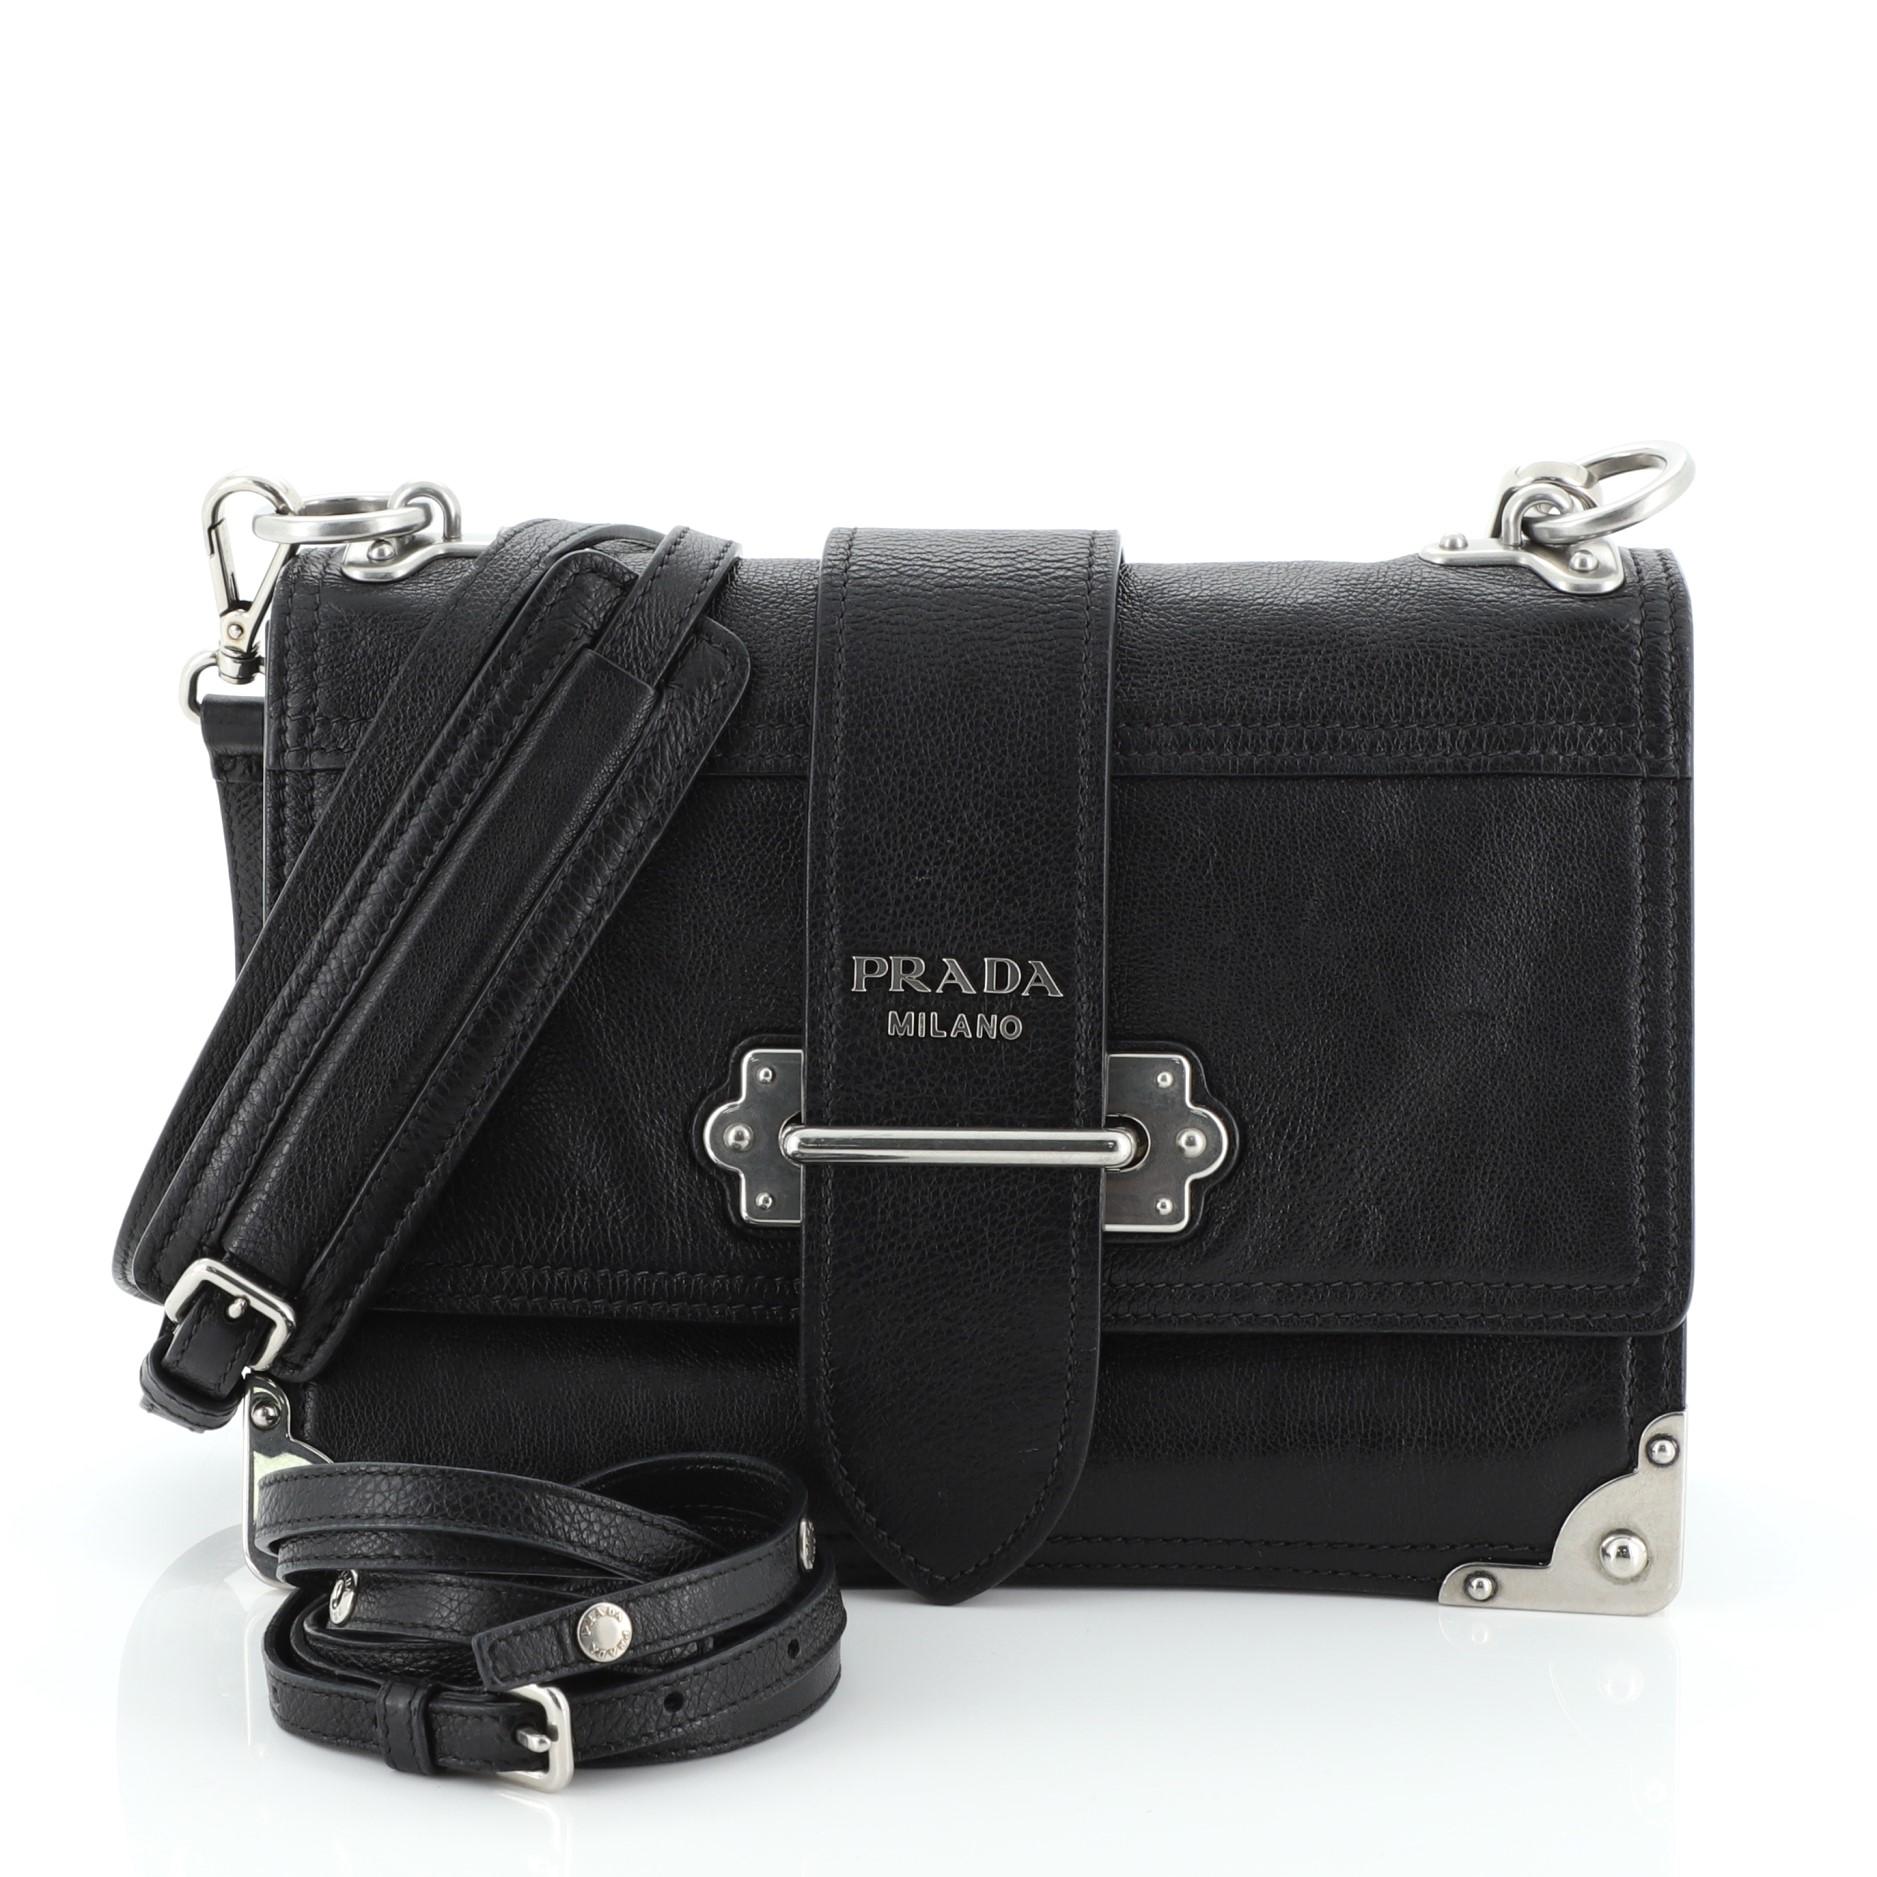 This Prada Cahier Convertible Shoulder Bag City Calf Medium, crafted from black city calf leather, features a flat leather strap, metal hardware trim, and silver-tone hardware. Its buckle closure opens to a blue suede interior with side zip and slip